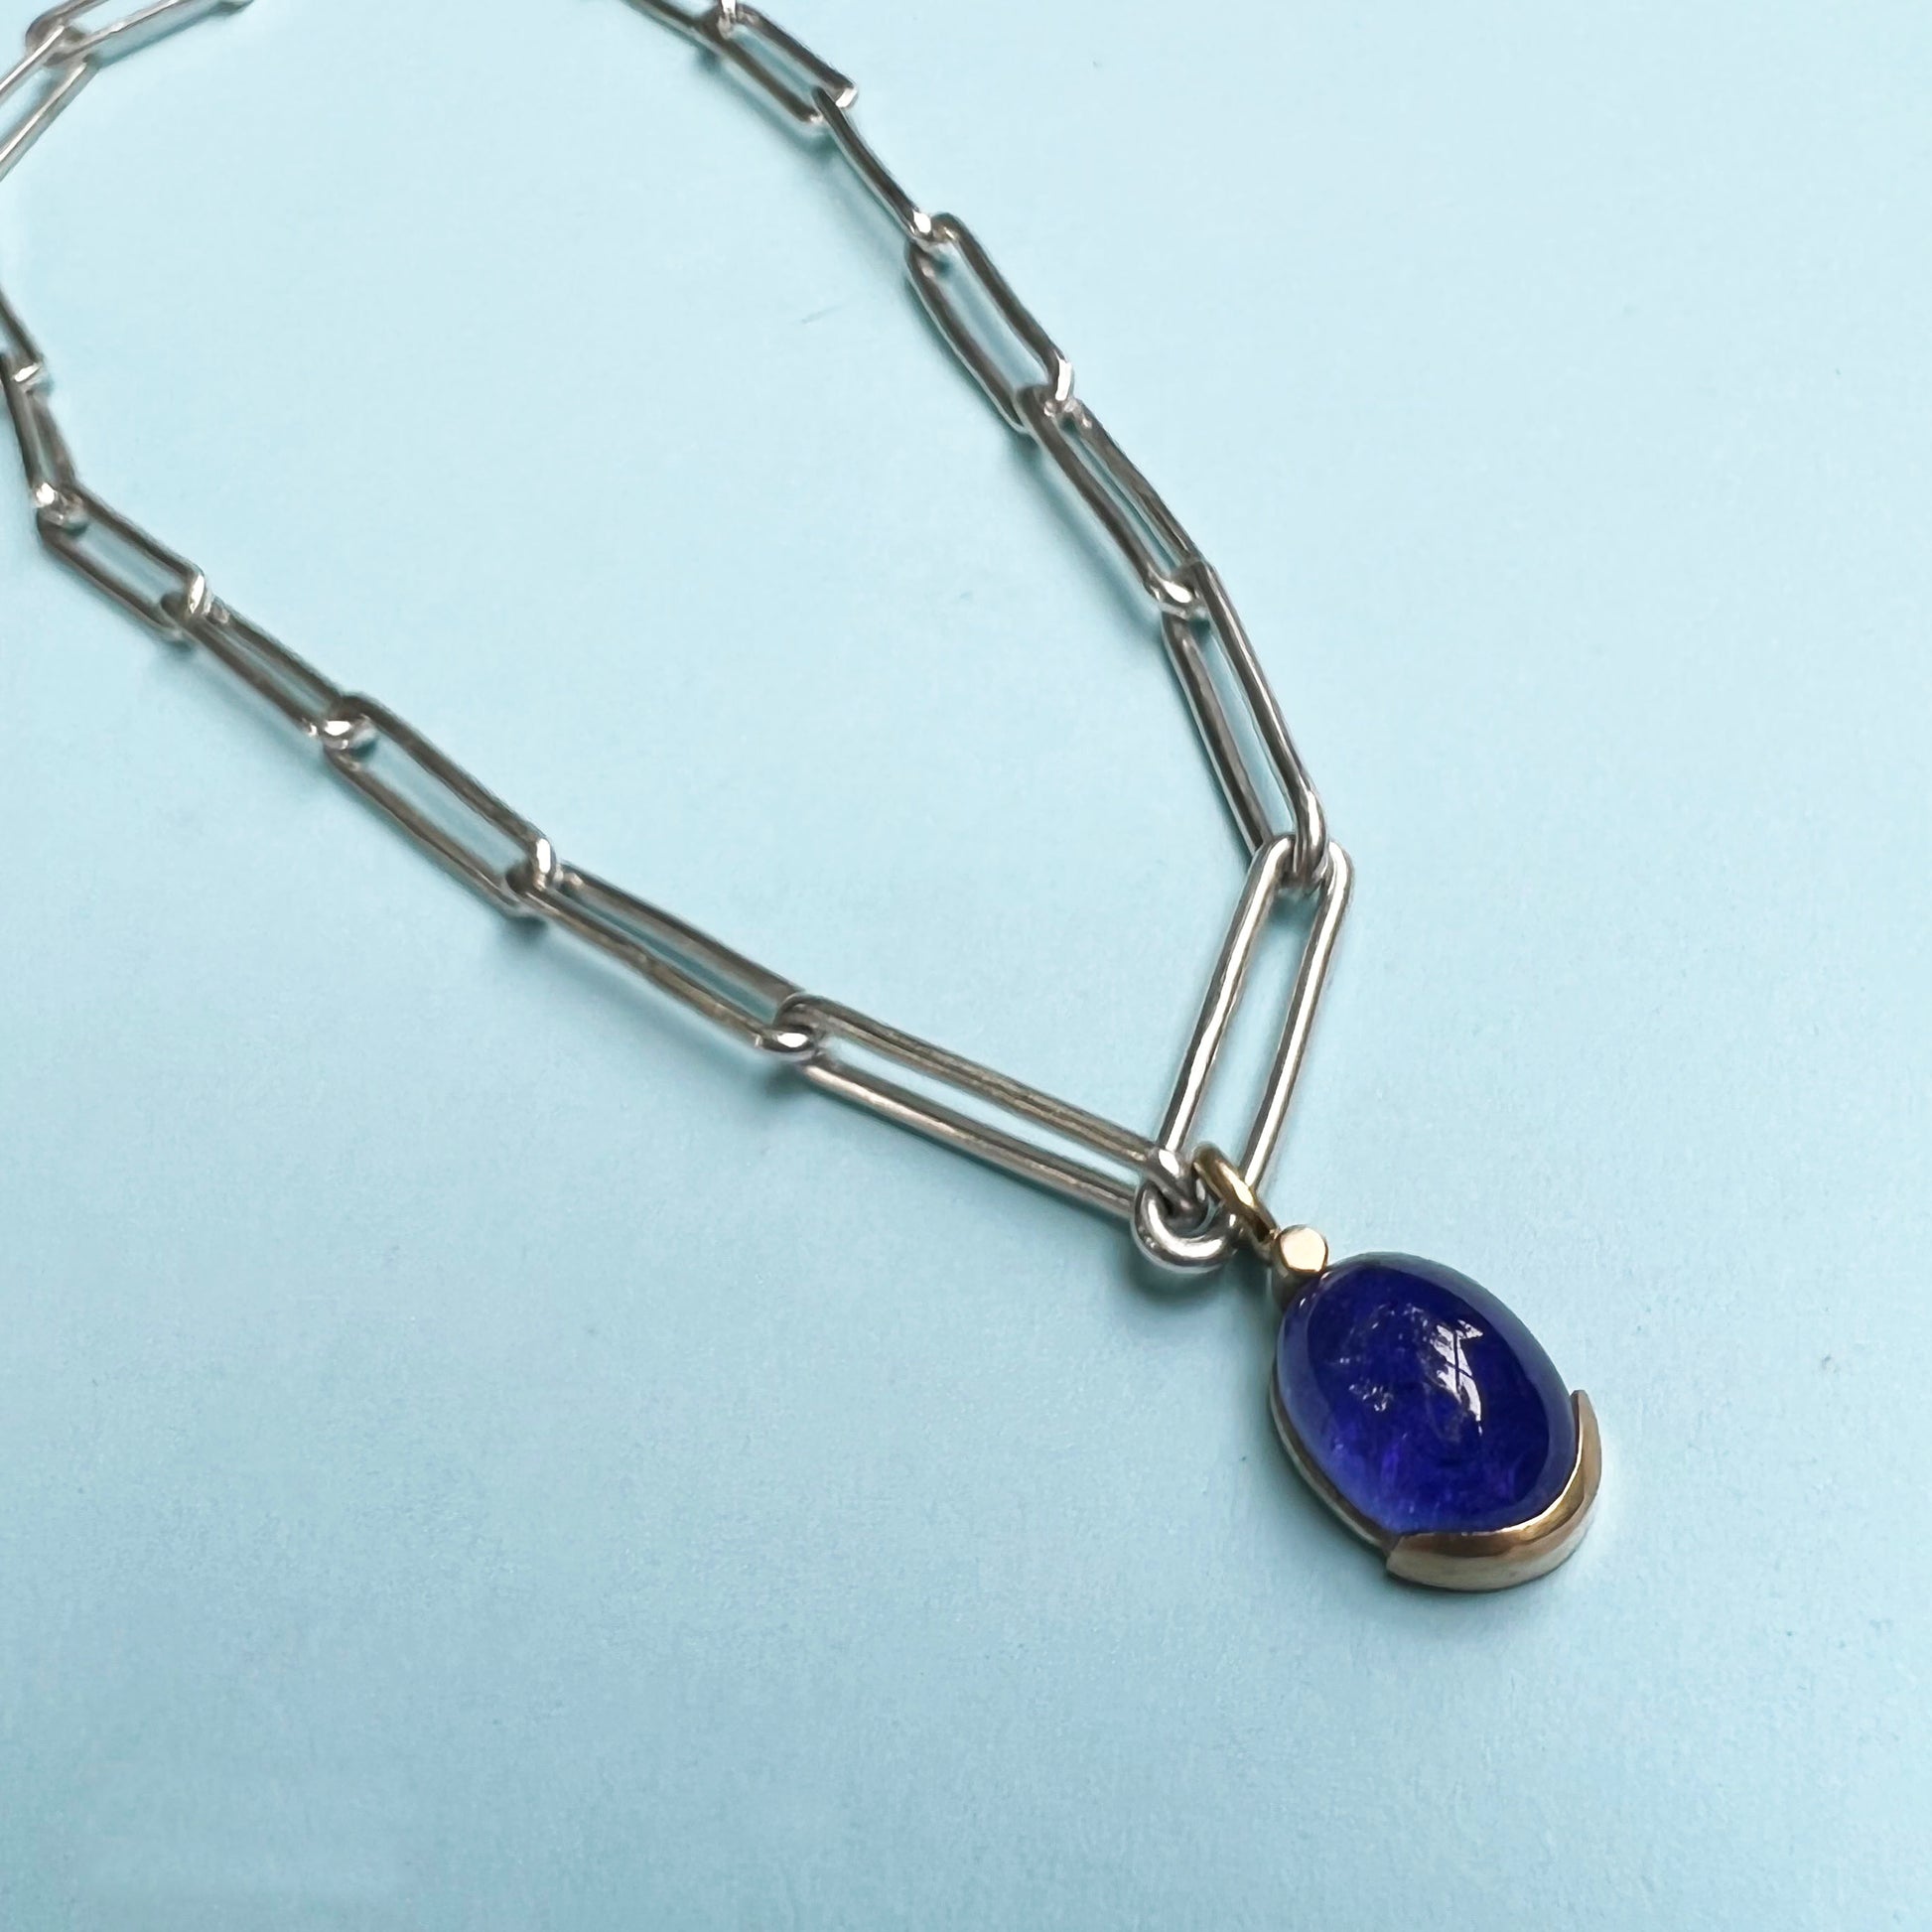 unique jewellery, handmade jewellery, 18ct gold & tanzanite necklace, 18ct gold necklace, sterling silver chain, tanzanite pendant, tanzanite necklace, gemstone necklace, paperclip chain